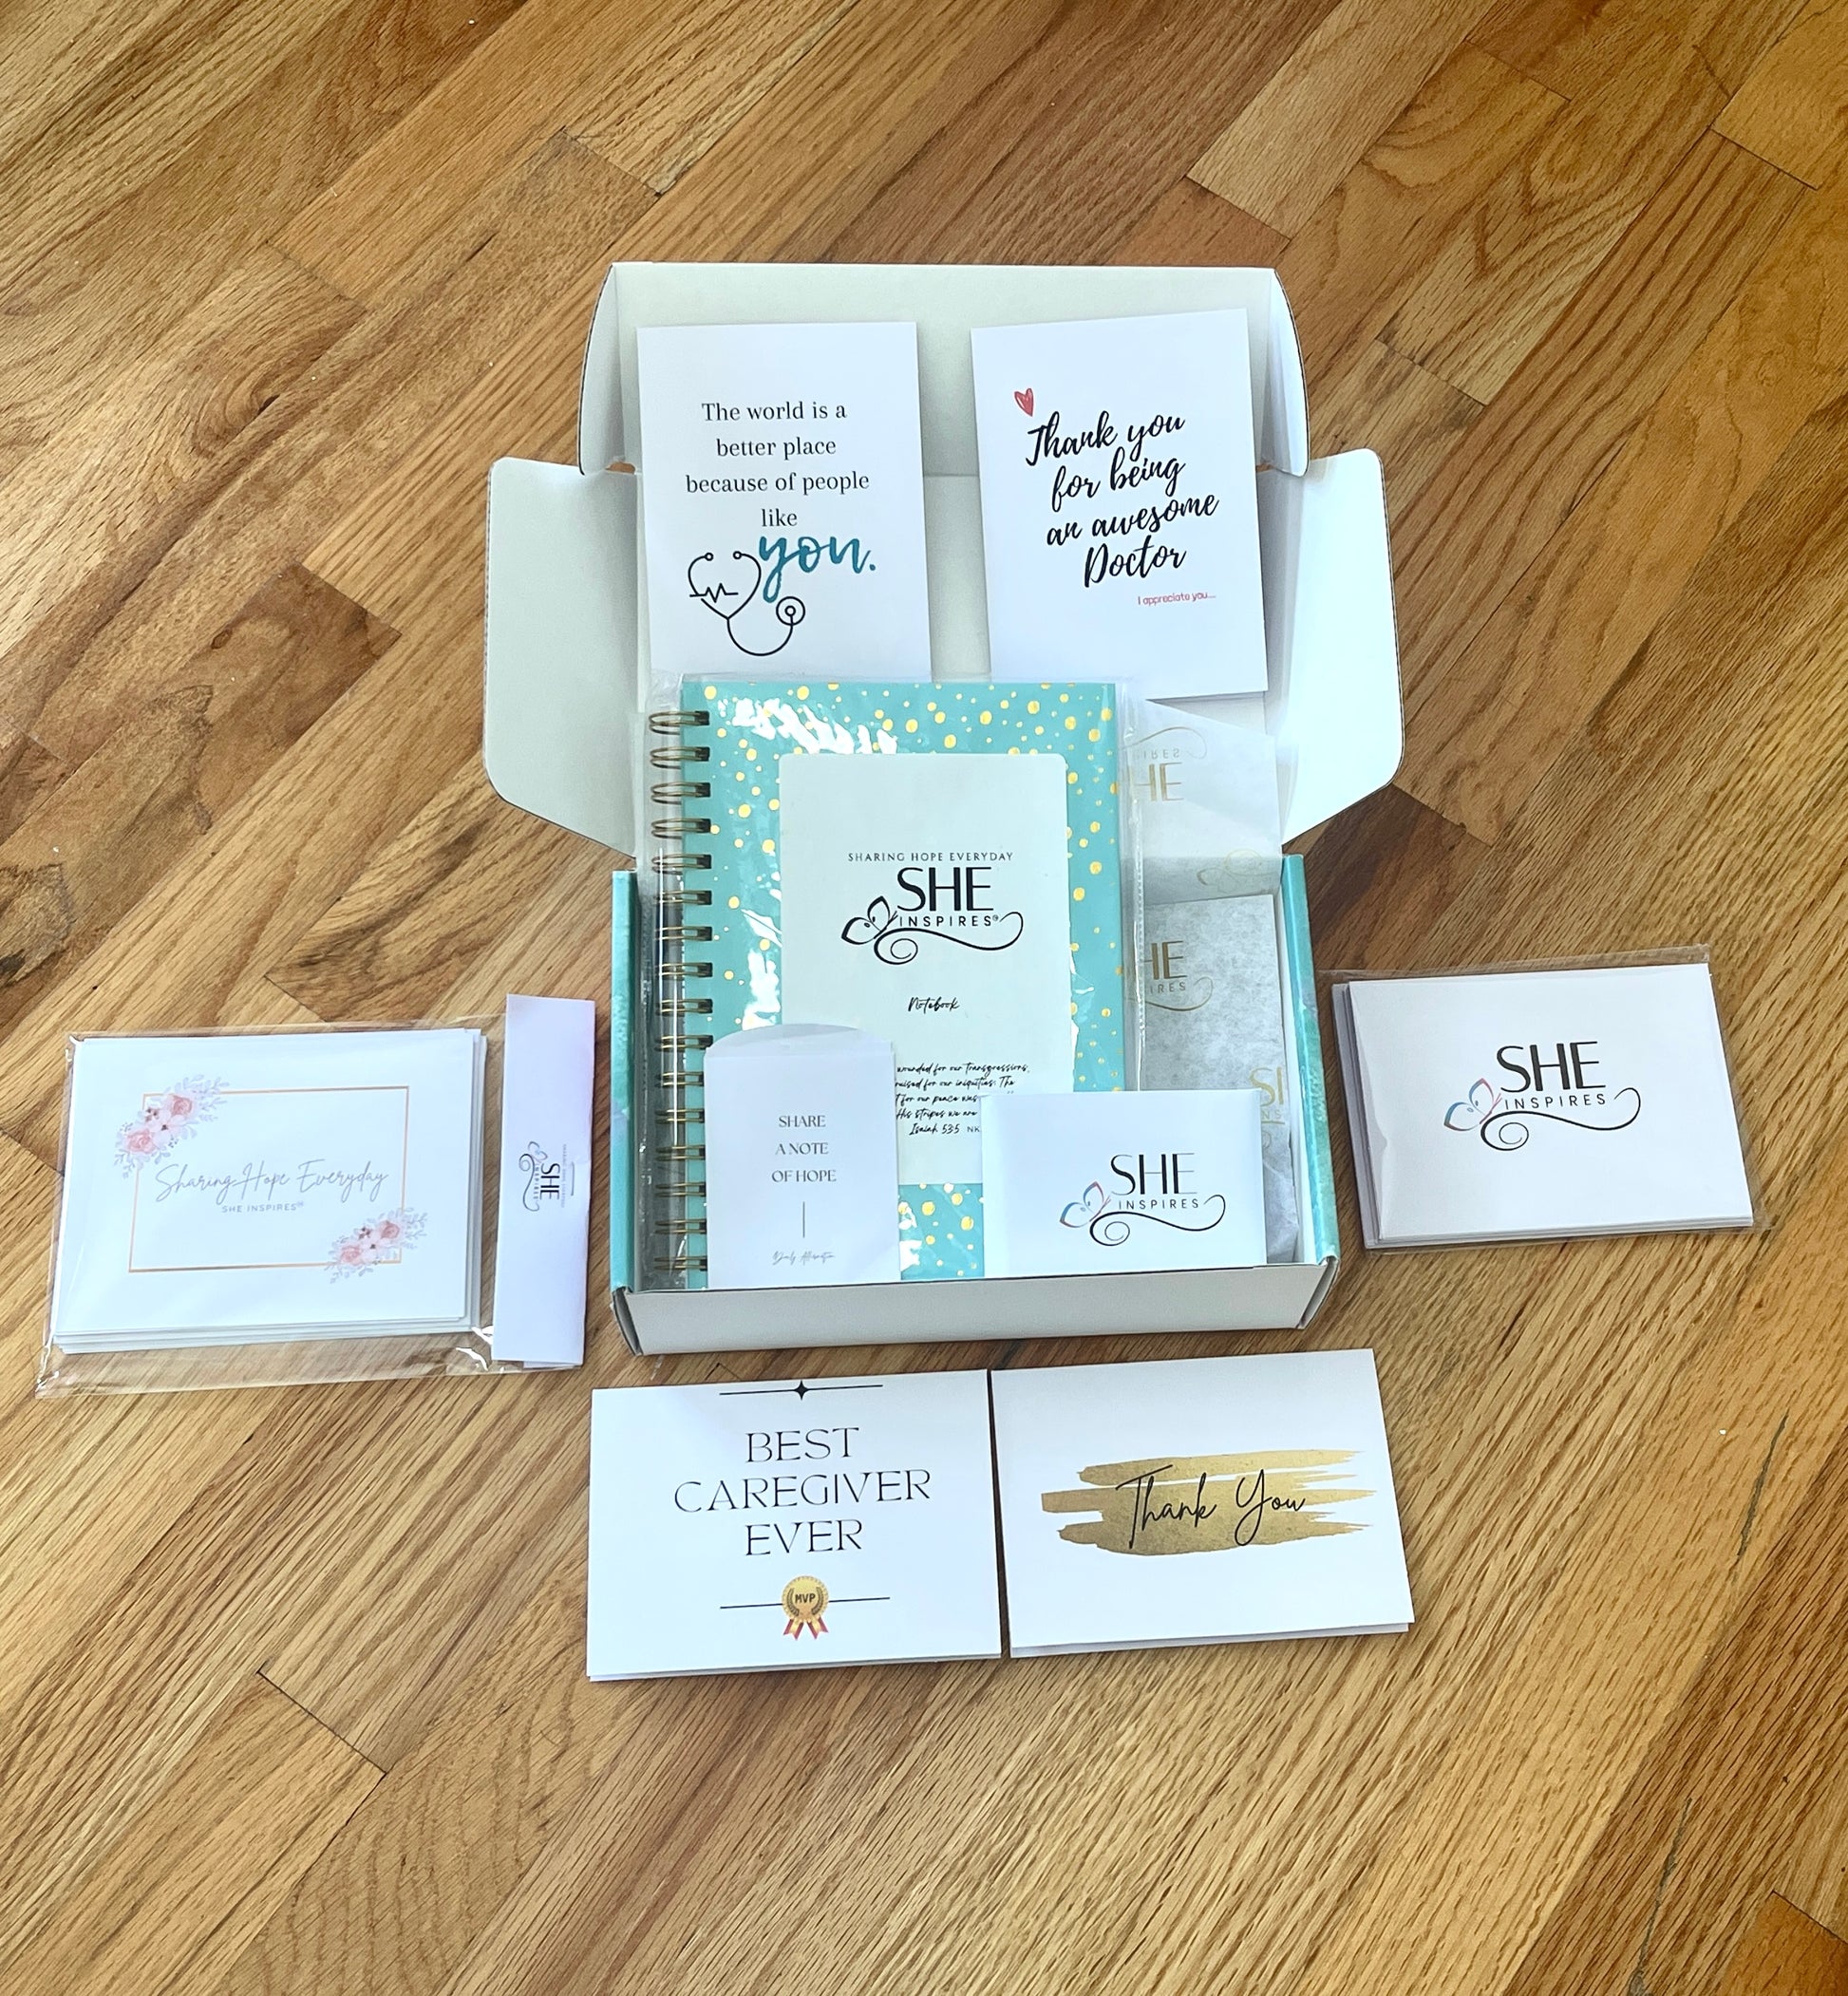 Encouragement In A Box-Stationery Set, Cancer Gift Box For Women